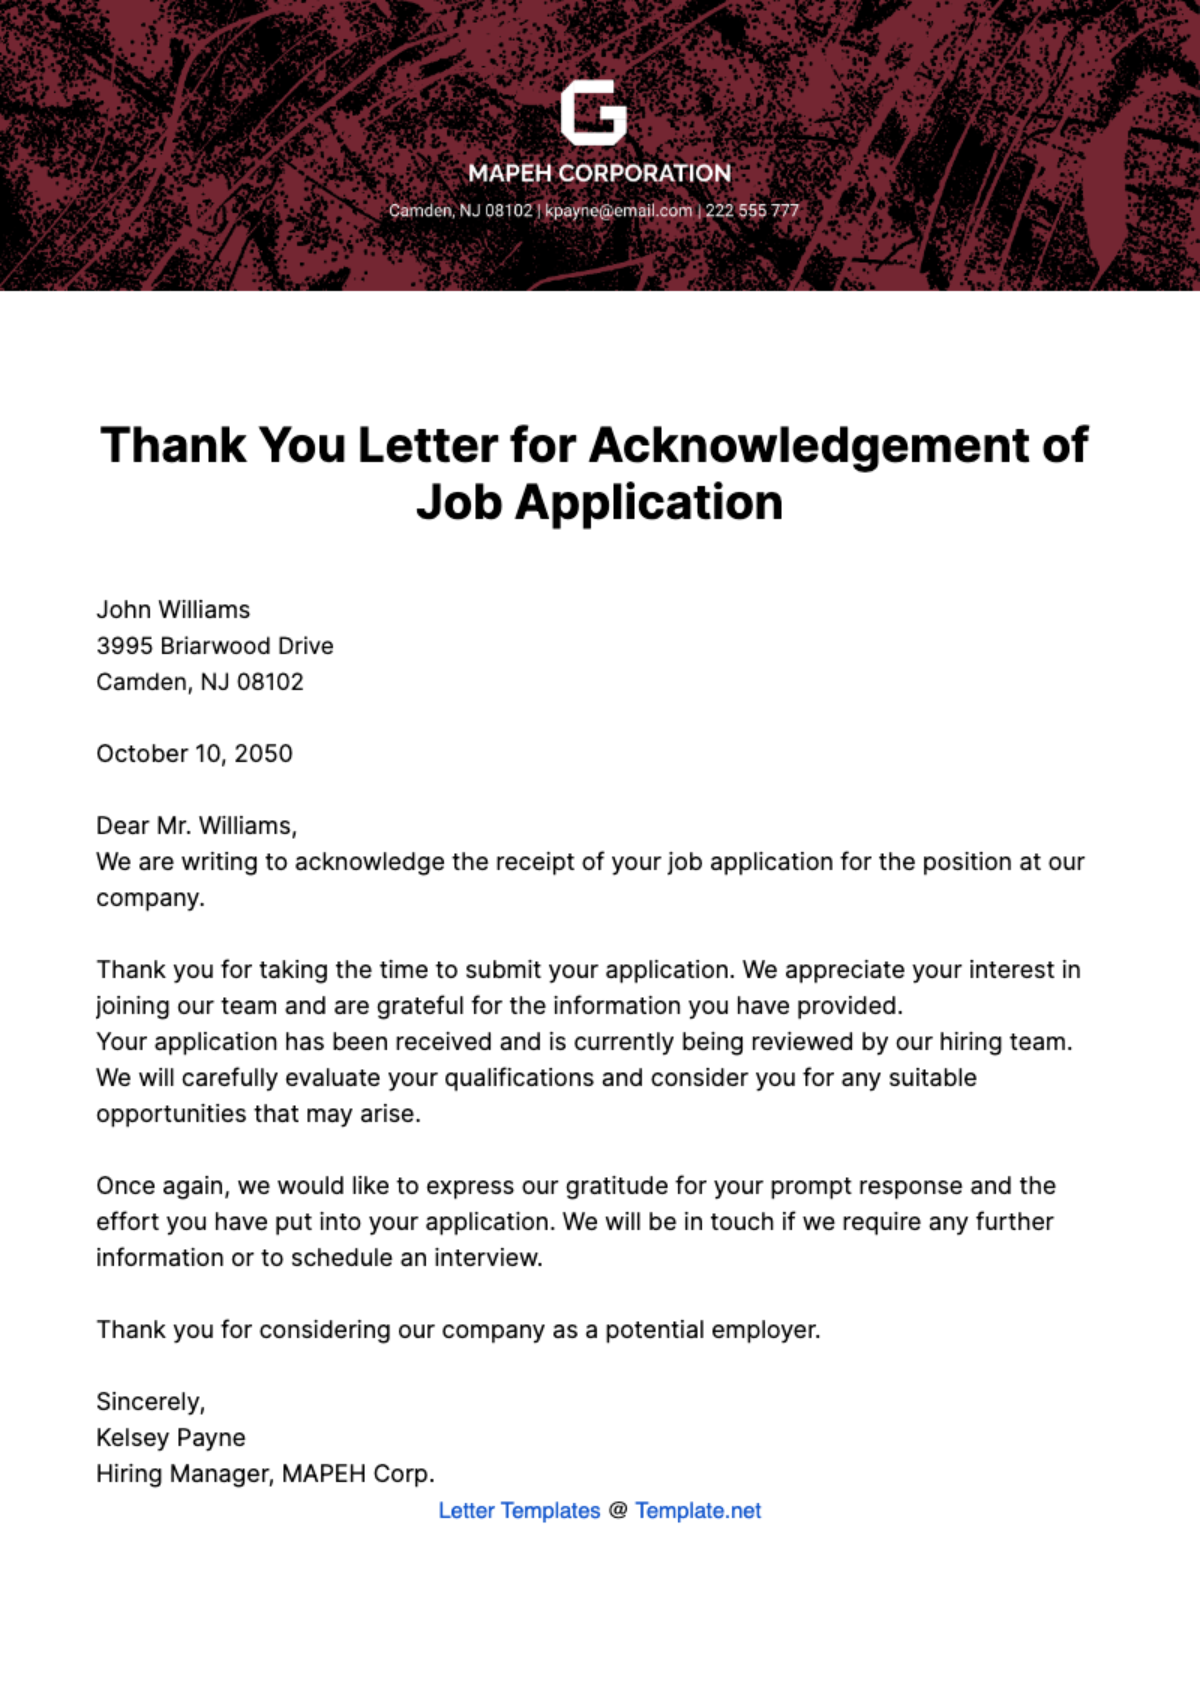 Free Thank you Letter for Acknowledgement of Job Application Template